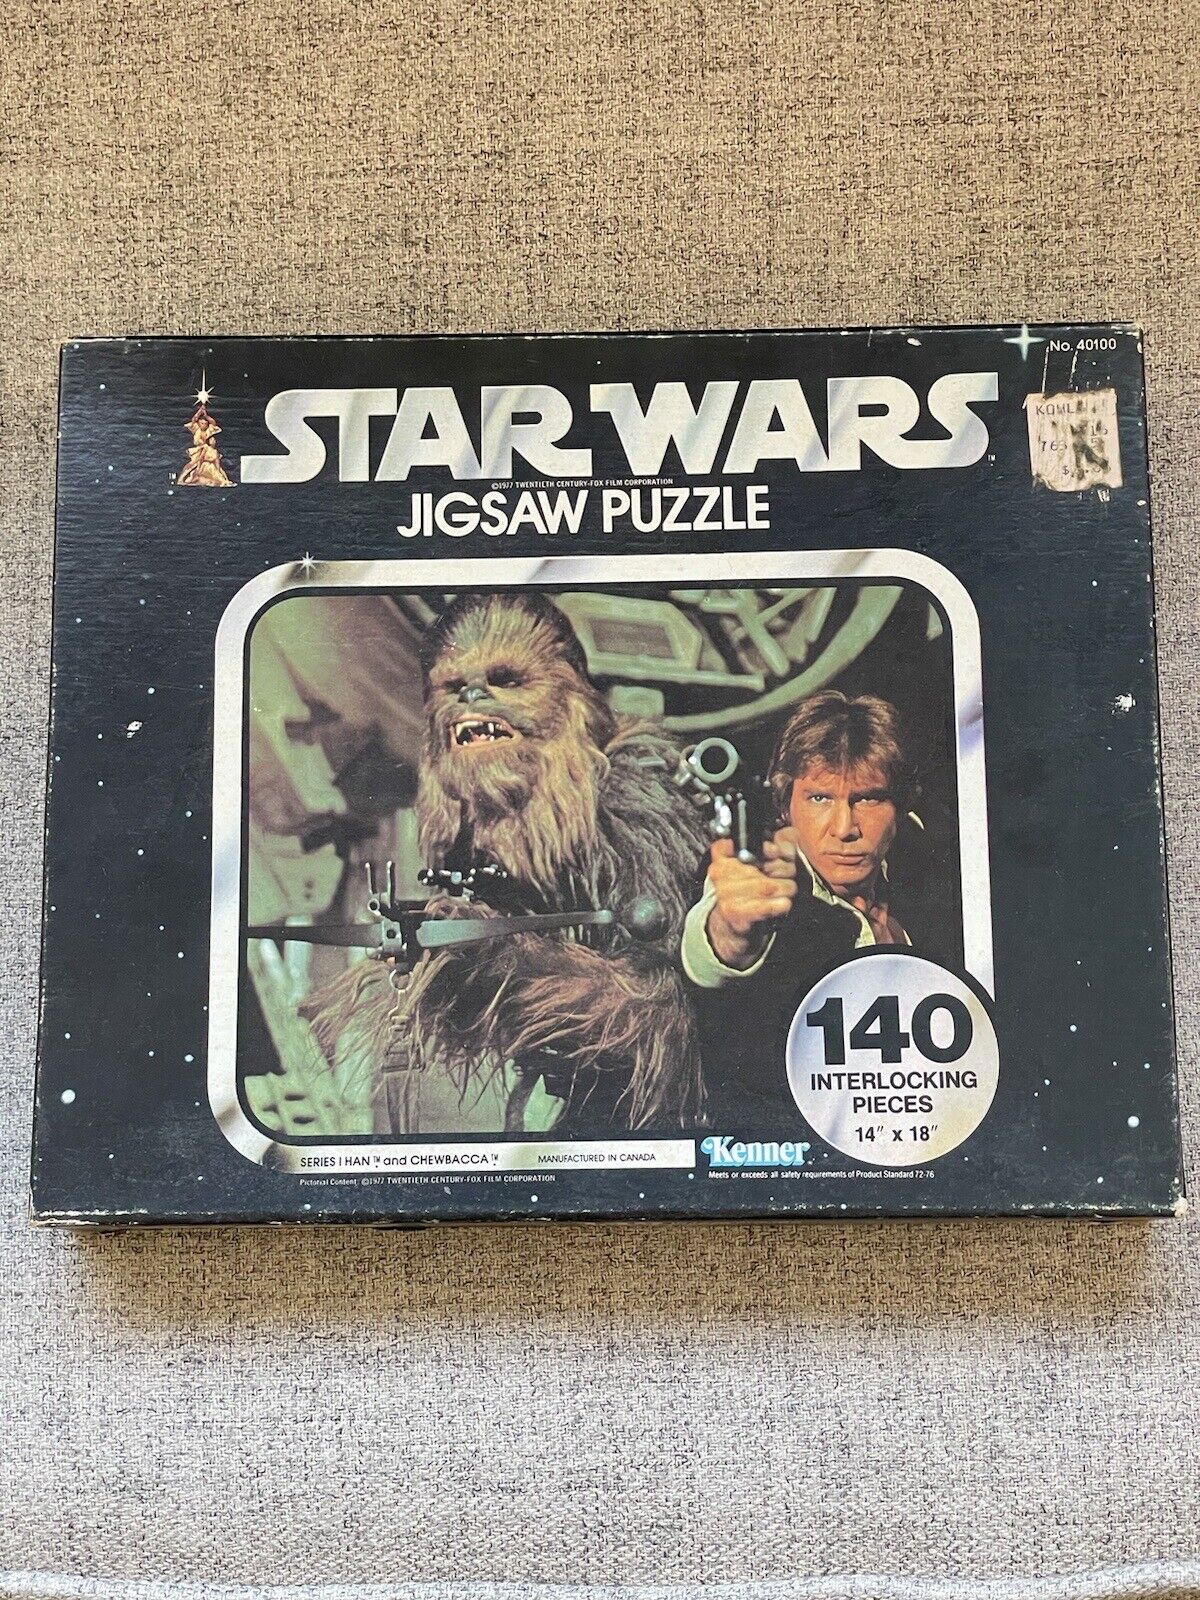 VINTAGE 1977 Star Wars 140 Piece Jigsaw Puzzle Kenner No 40100 Complete Han Solo